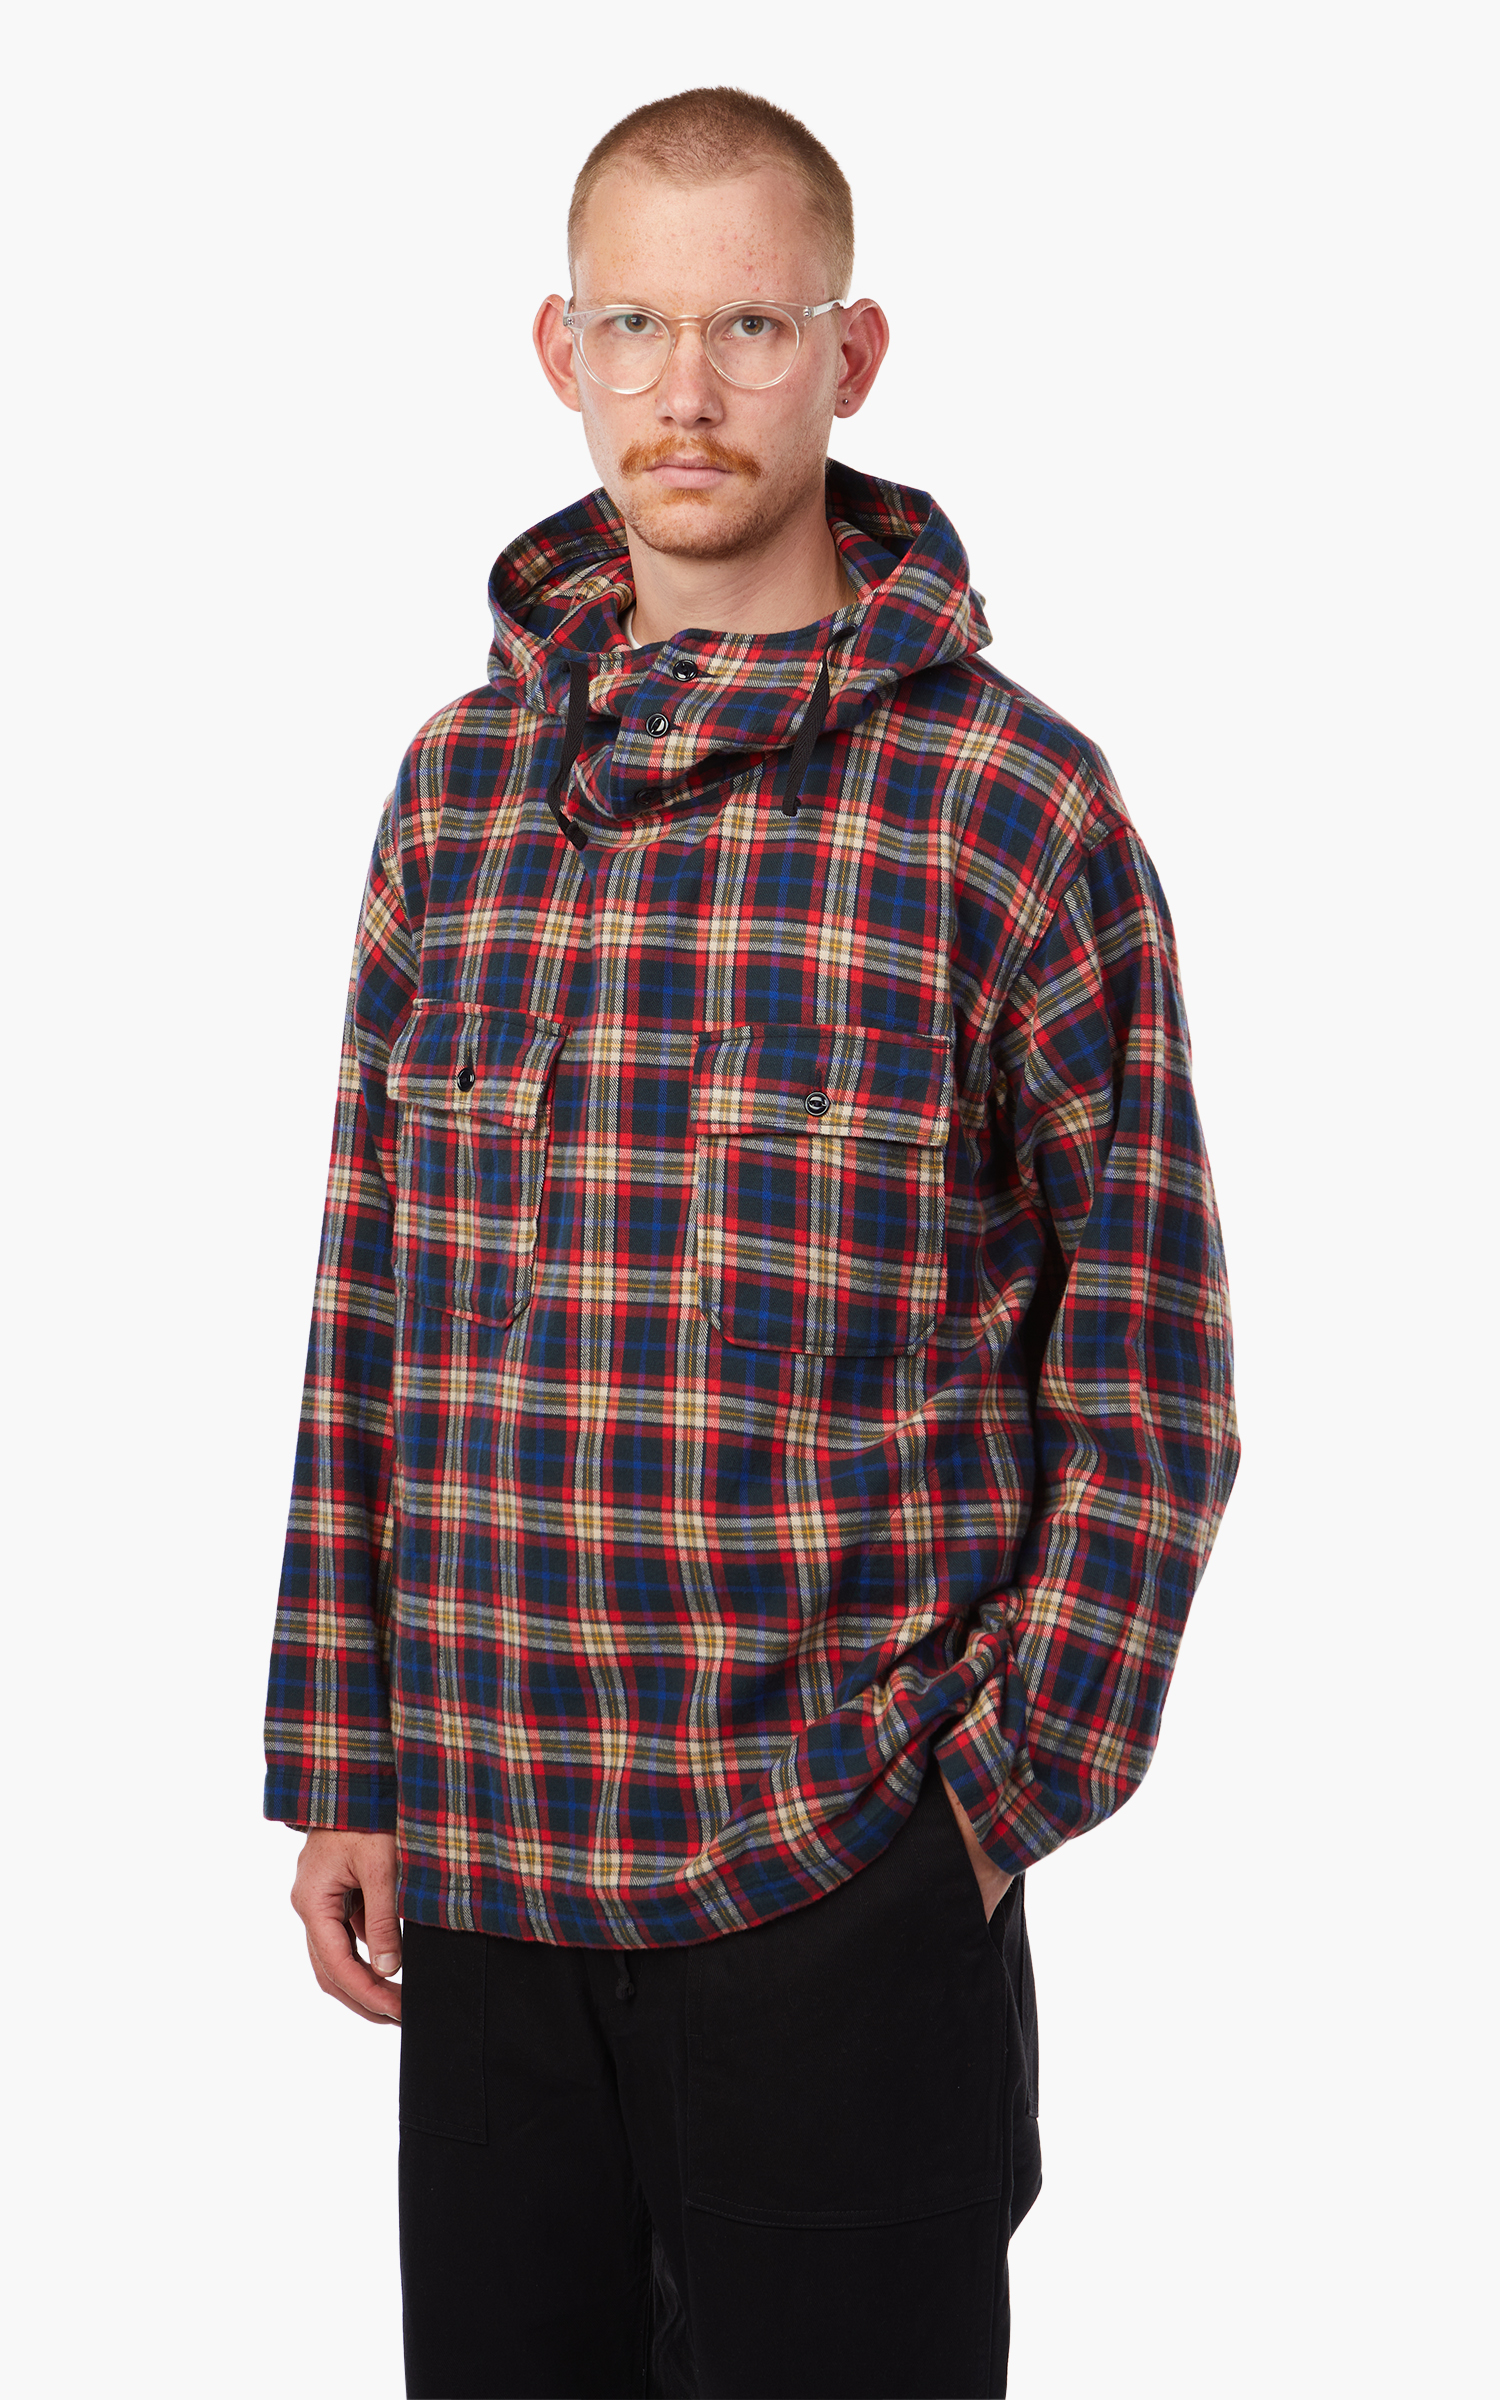 Engineered Garments Cagoule Shirt Navy/Red/White Cotton Flannel 